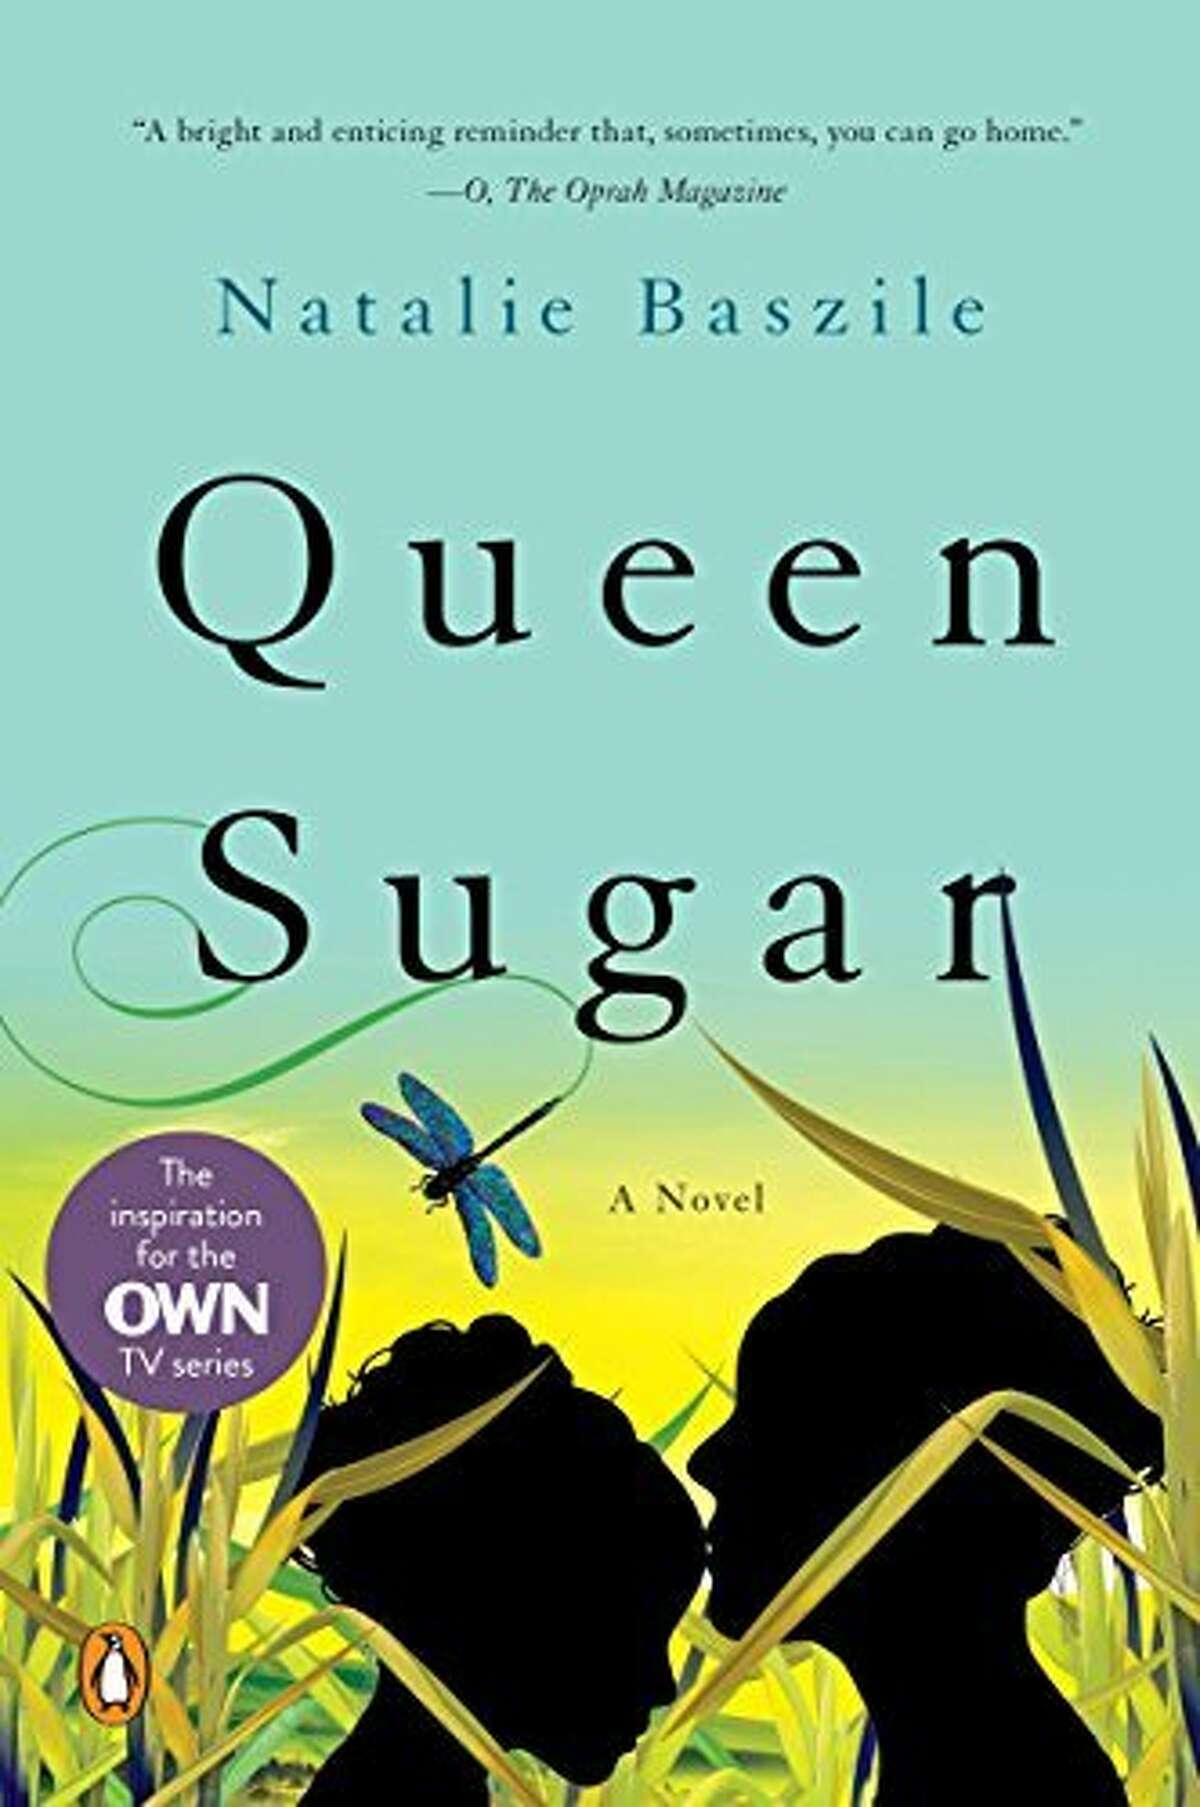 "Queen Sugar" by San Francisco author Natalie Baszile is now a television series on Oprah's OWN.